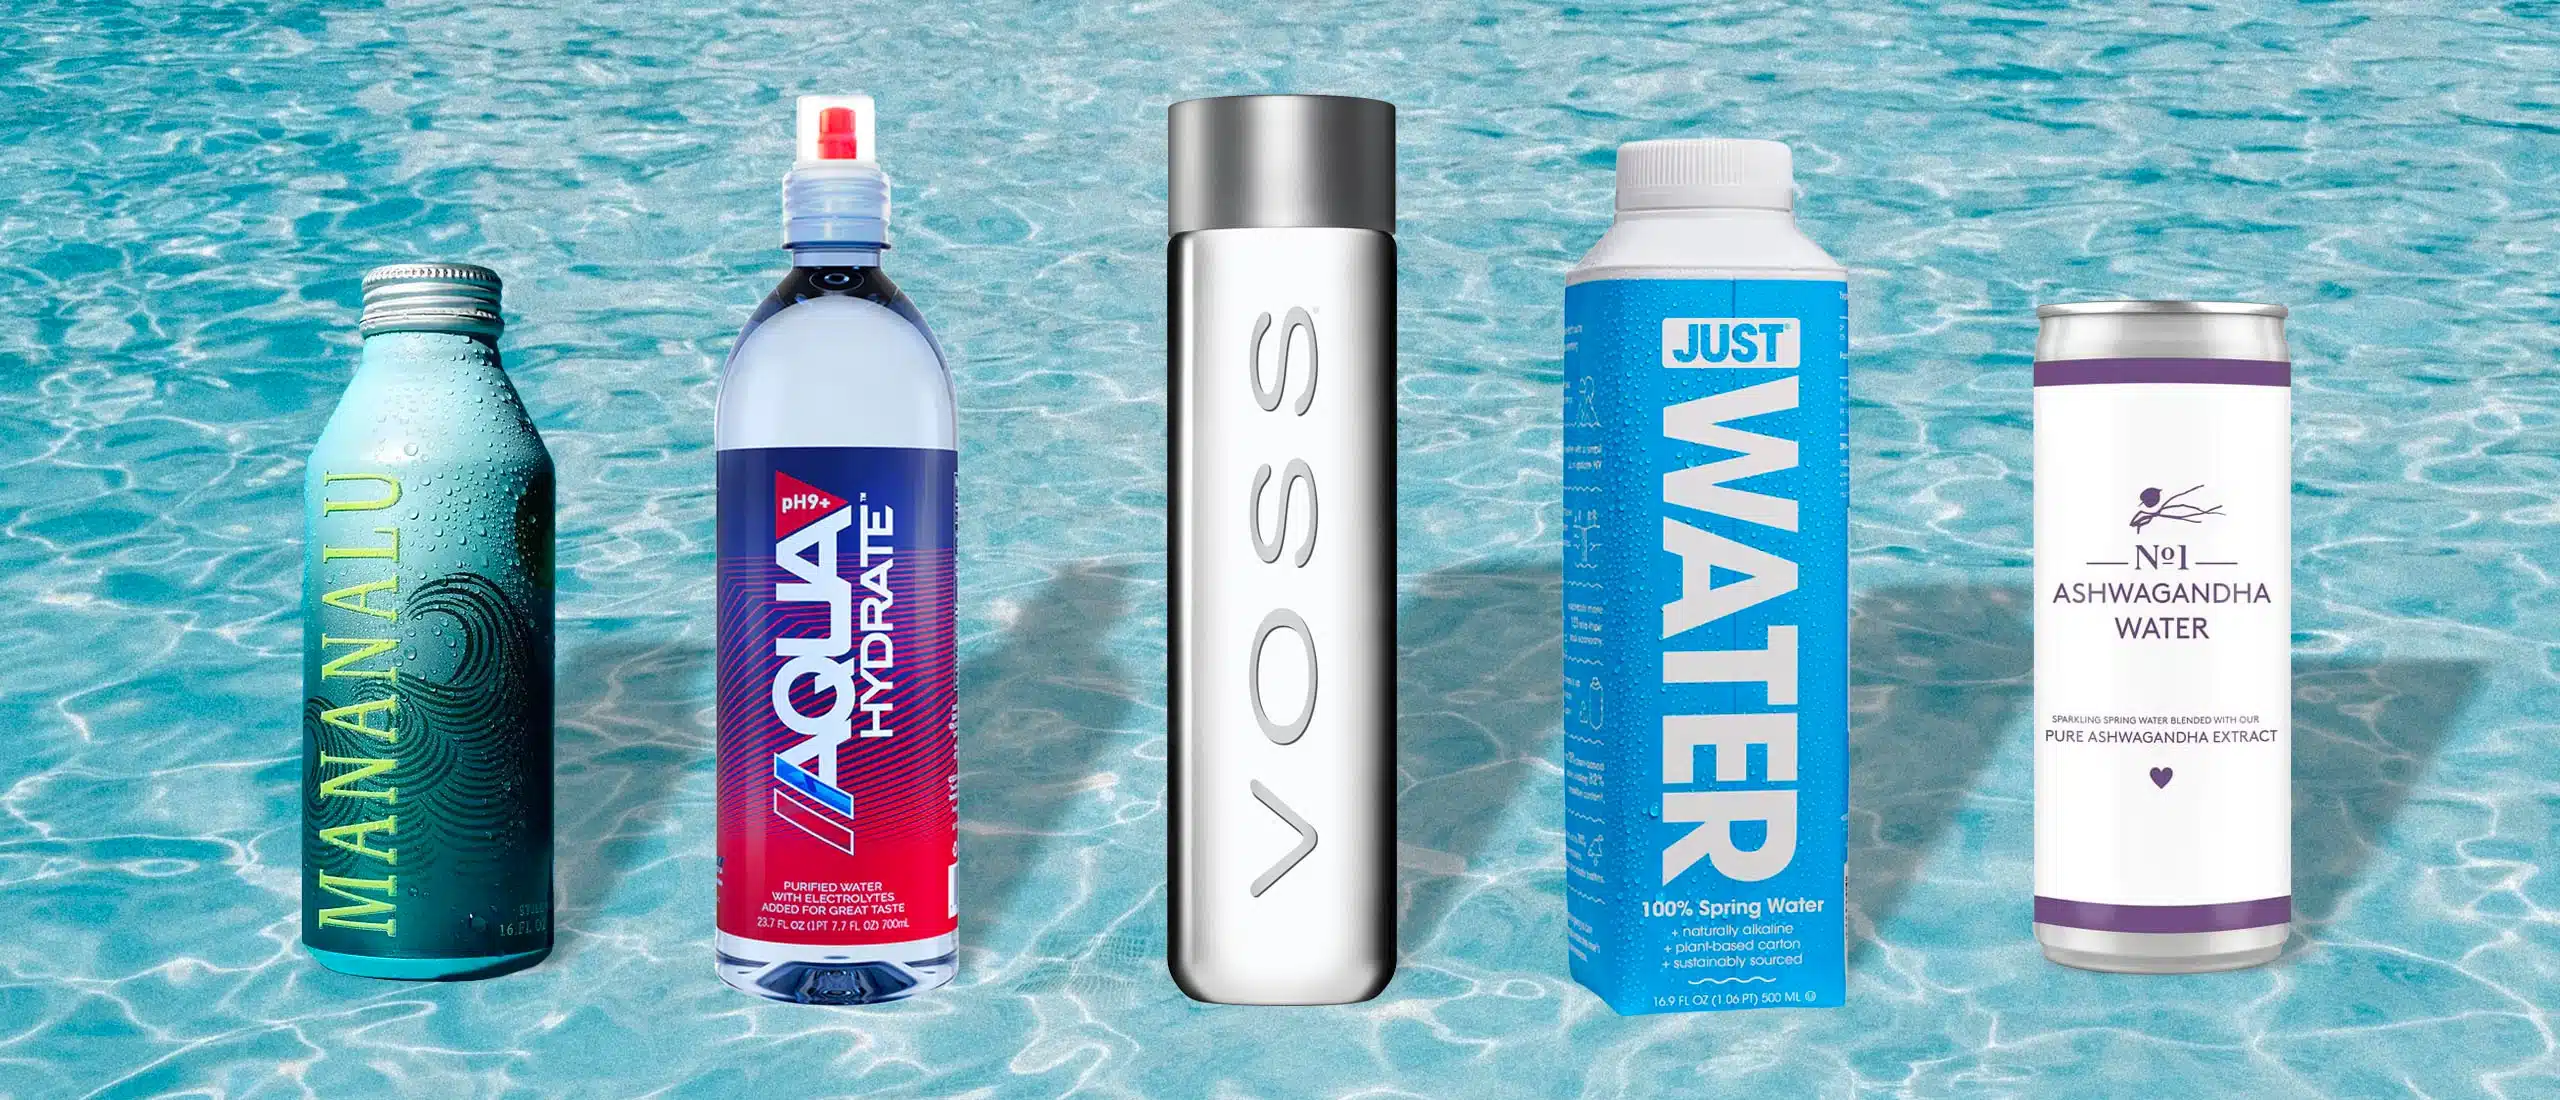 celebrity water brands on a blue background